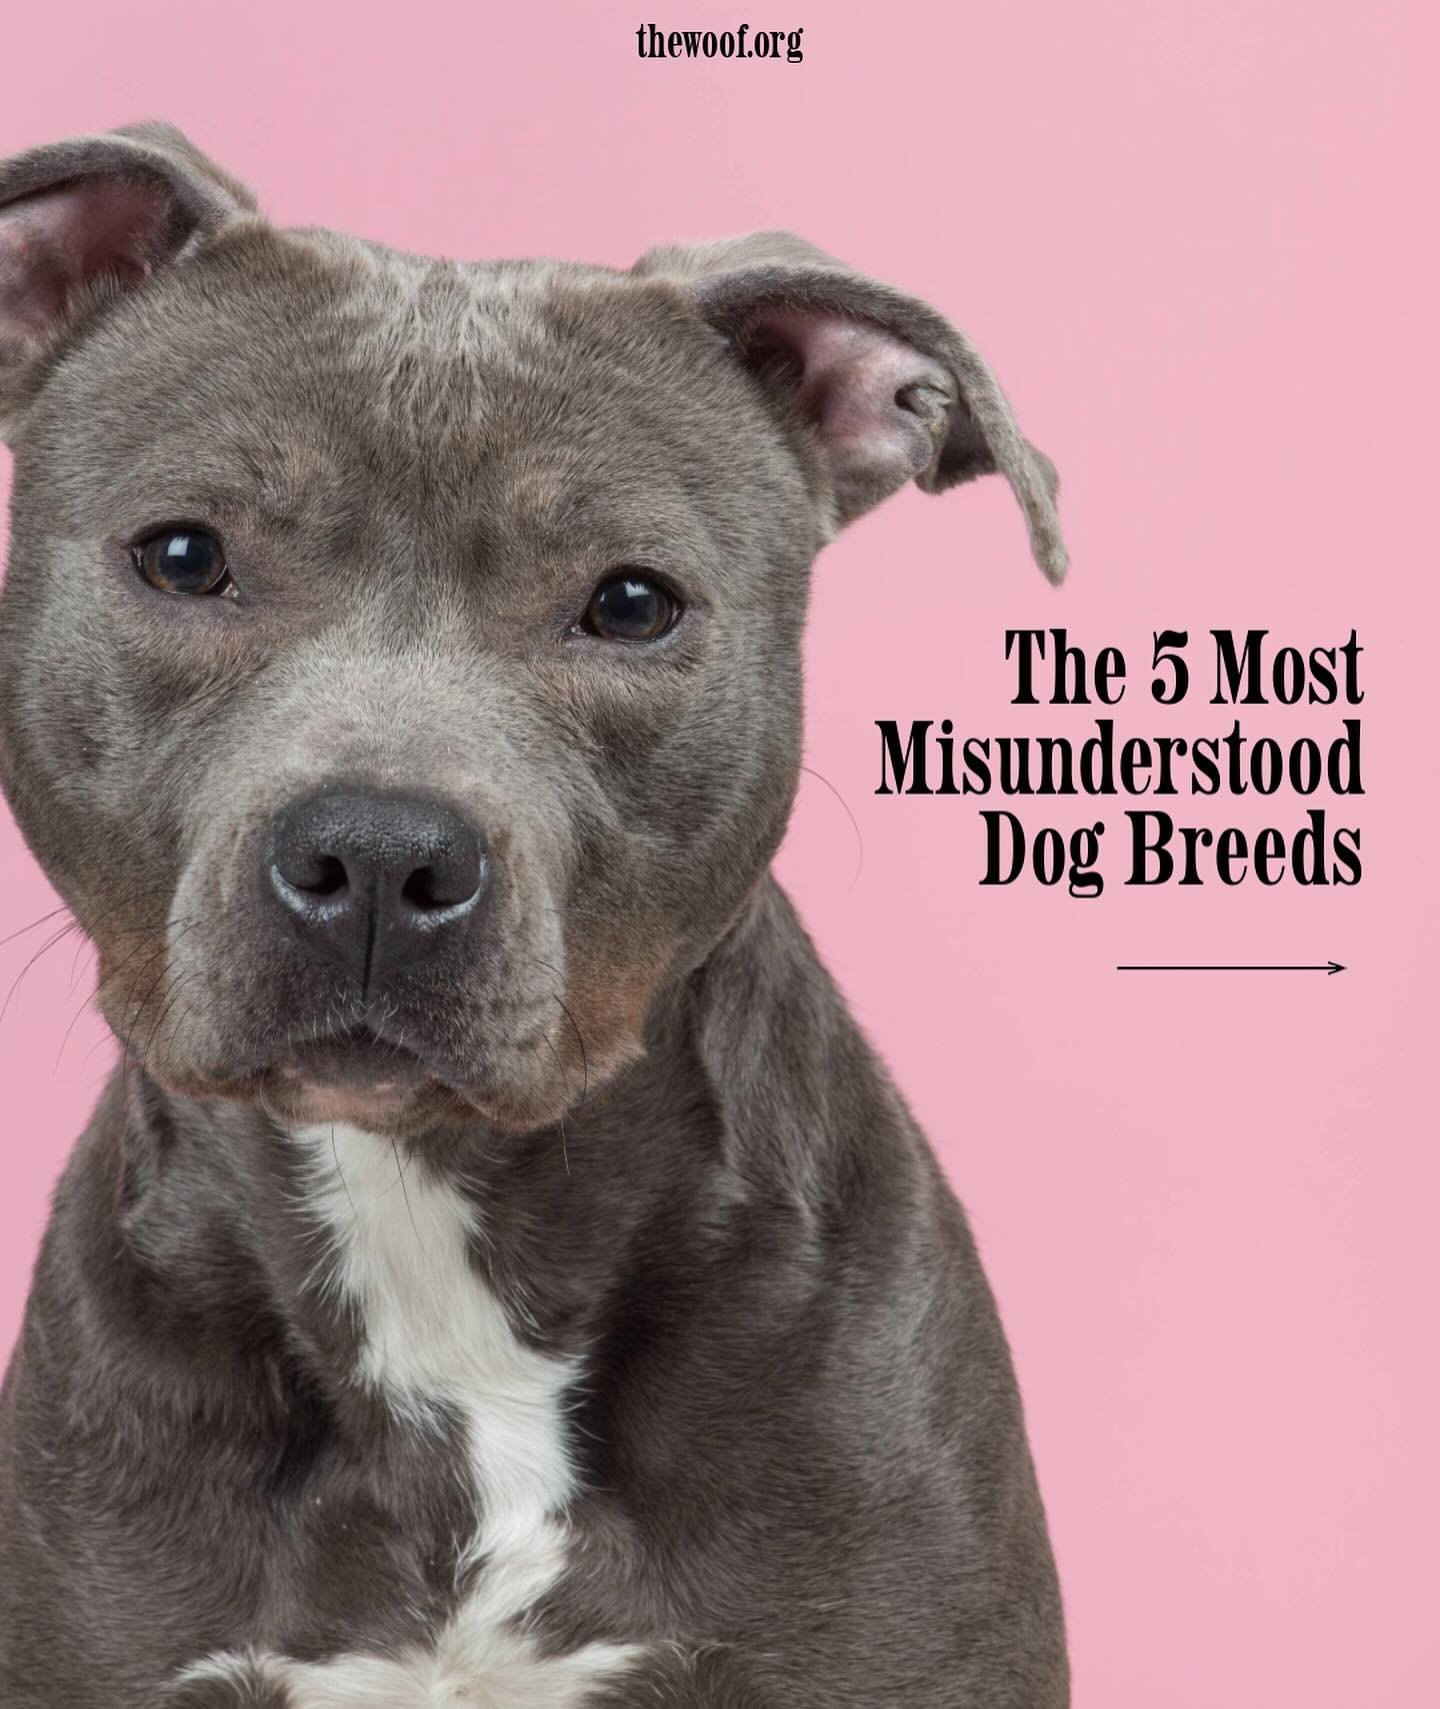 These breeds often get an unfair rep, so we&rsquo;re here to break those misconceptions &amp; shed light on their true personalities. With proper socialization and training, these dogs are all wonderful family pups❣️